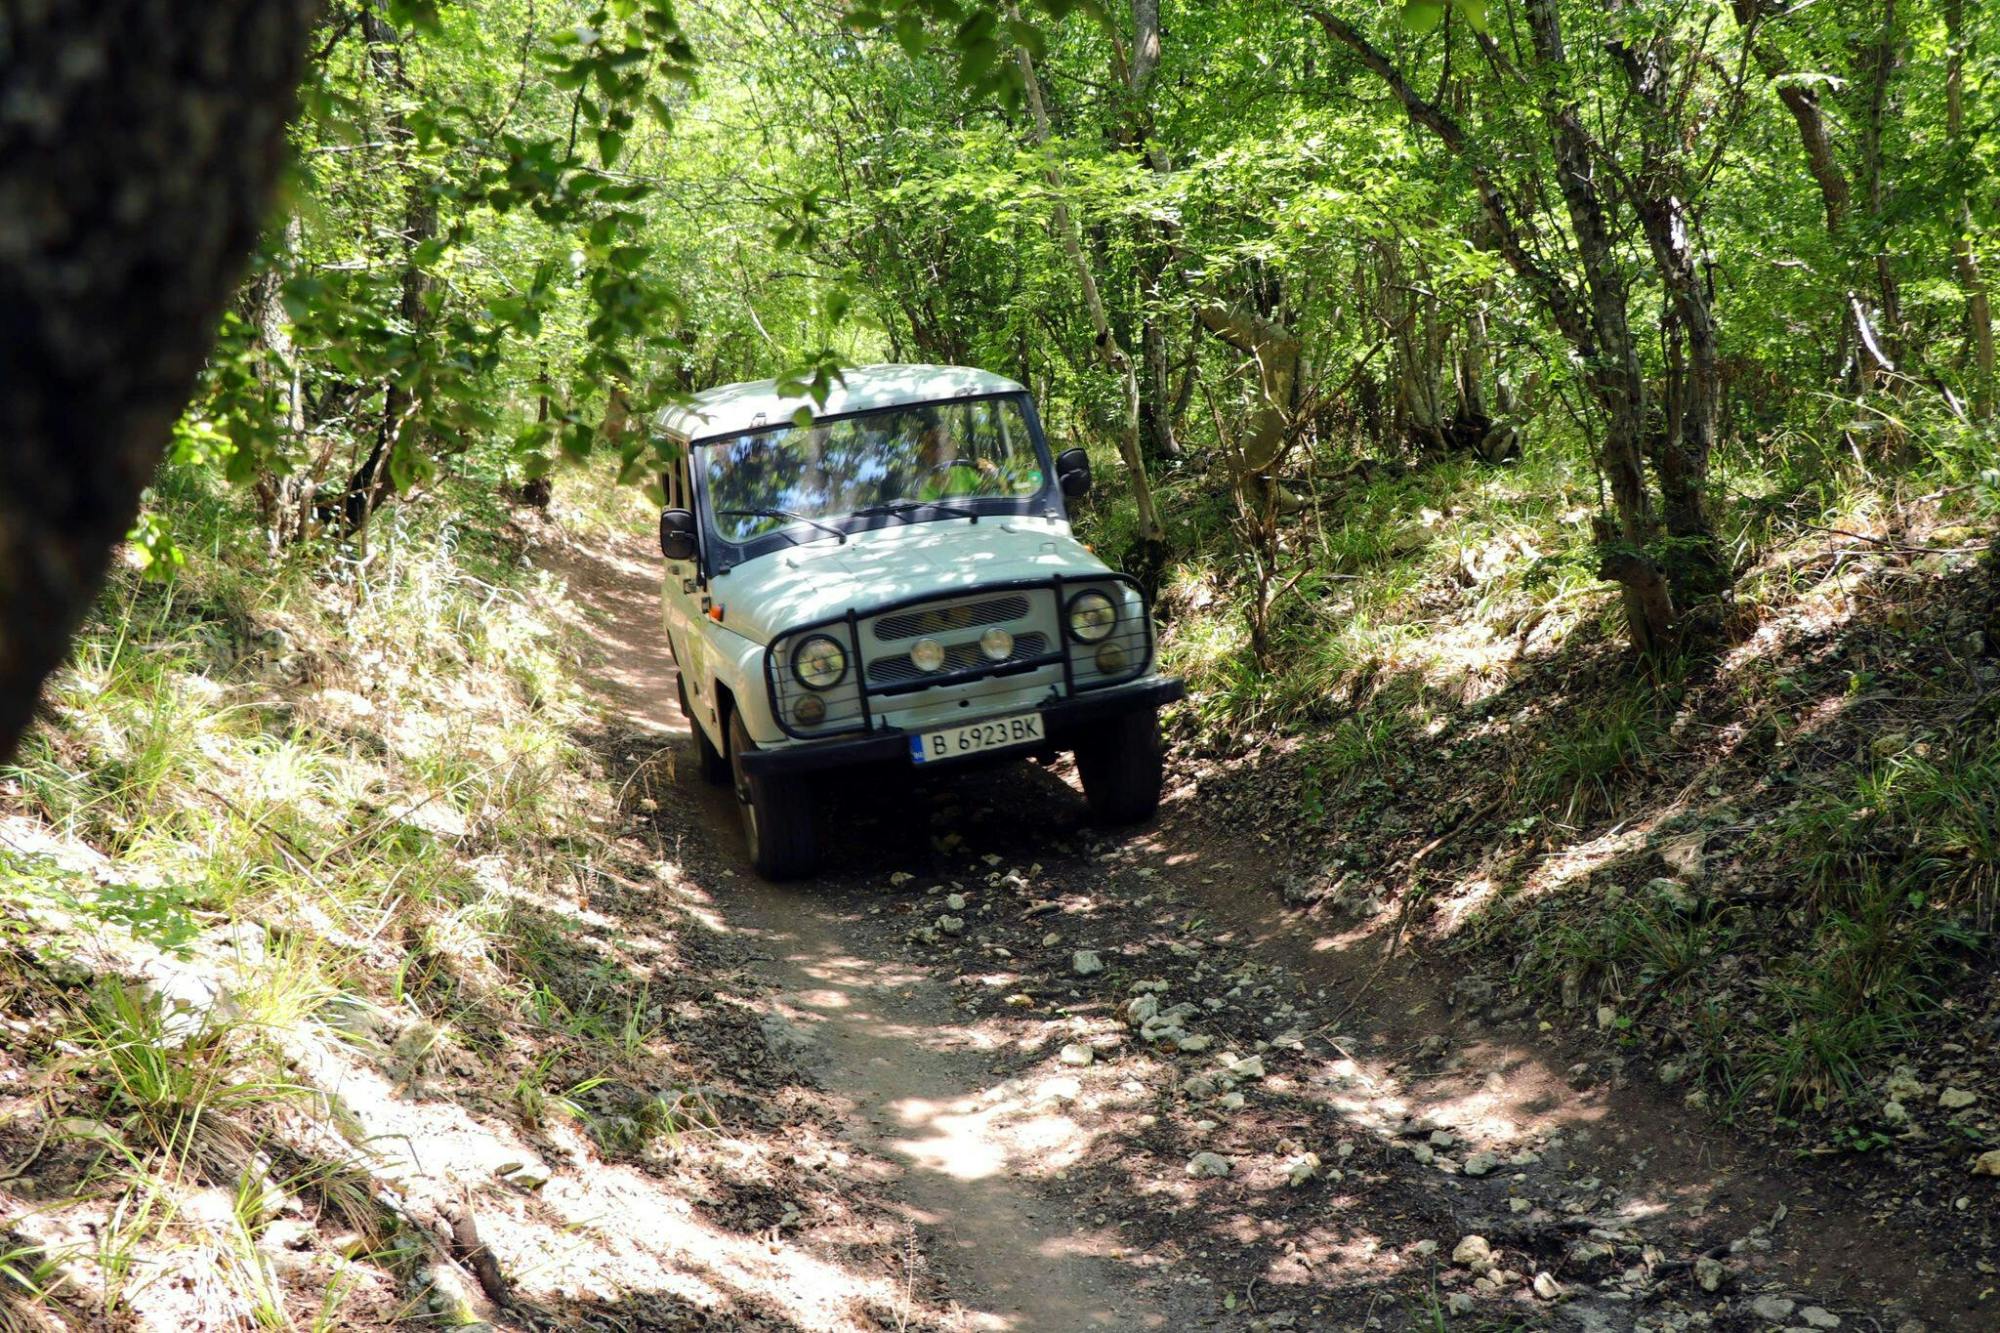 Bulgarian Countryside Off-road Tour from Varna